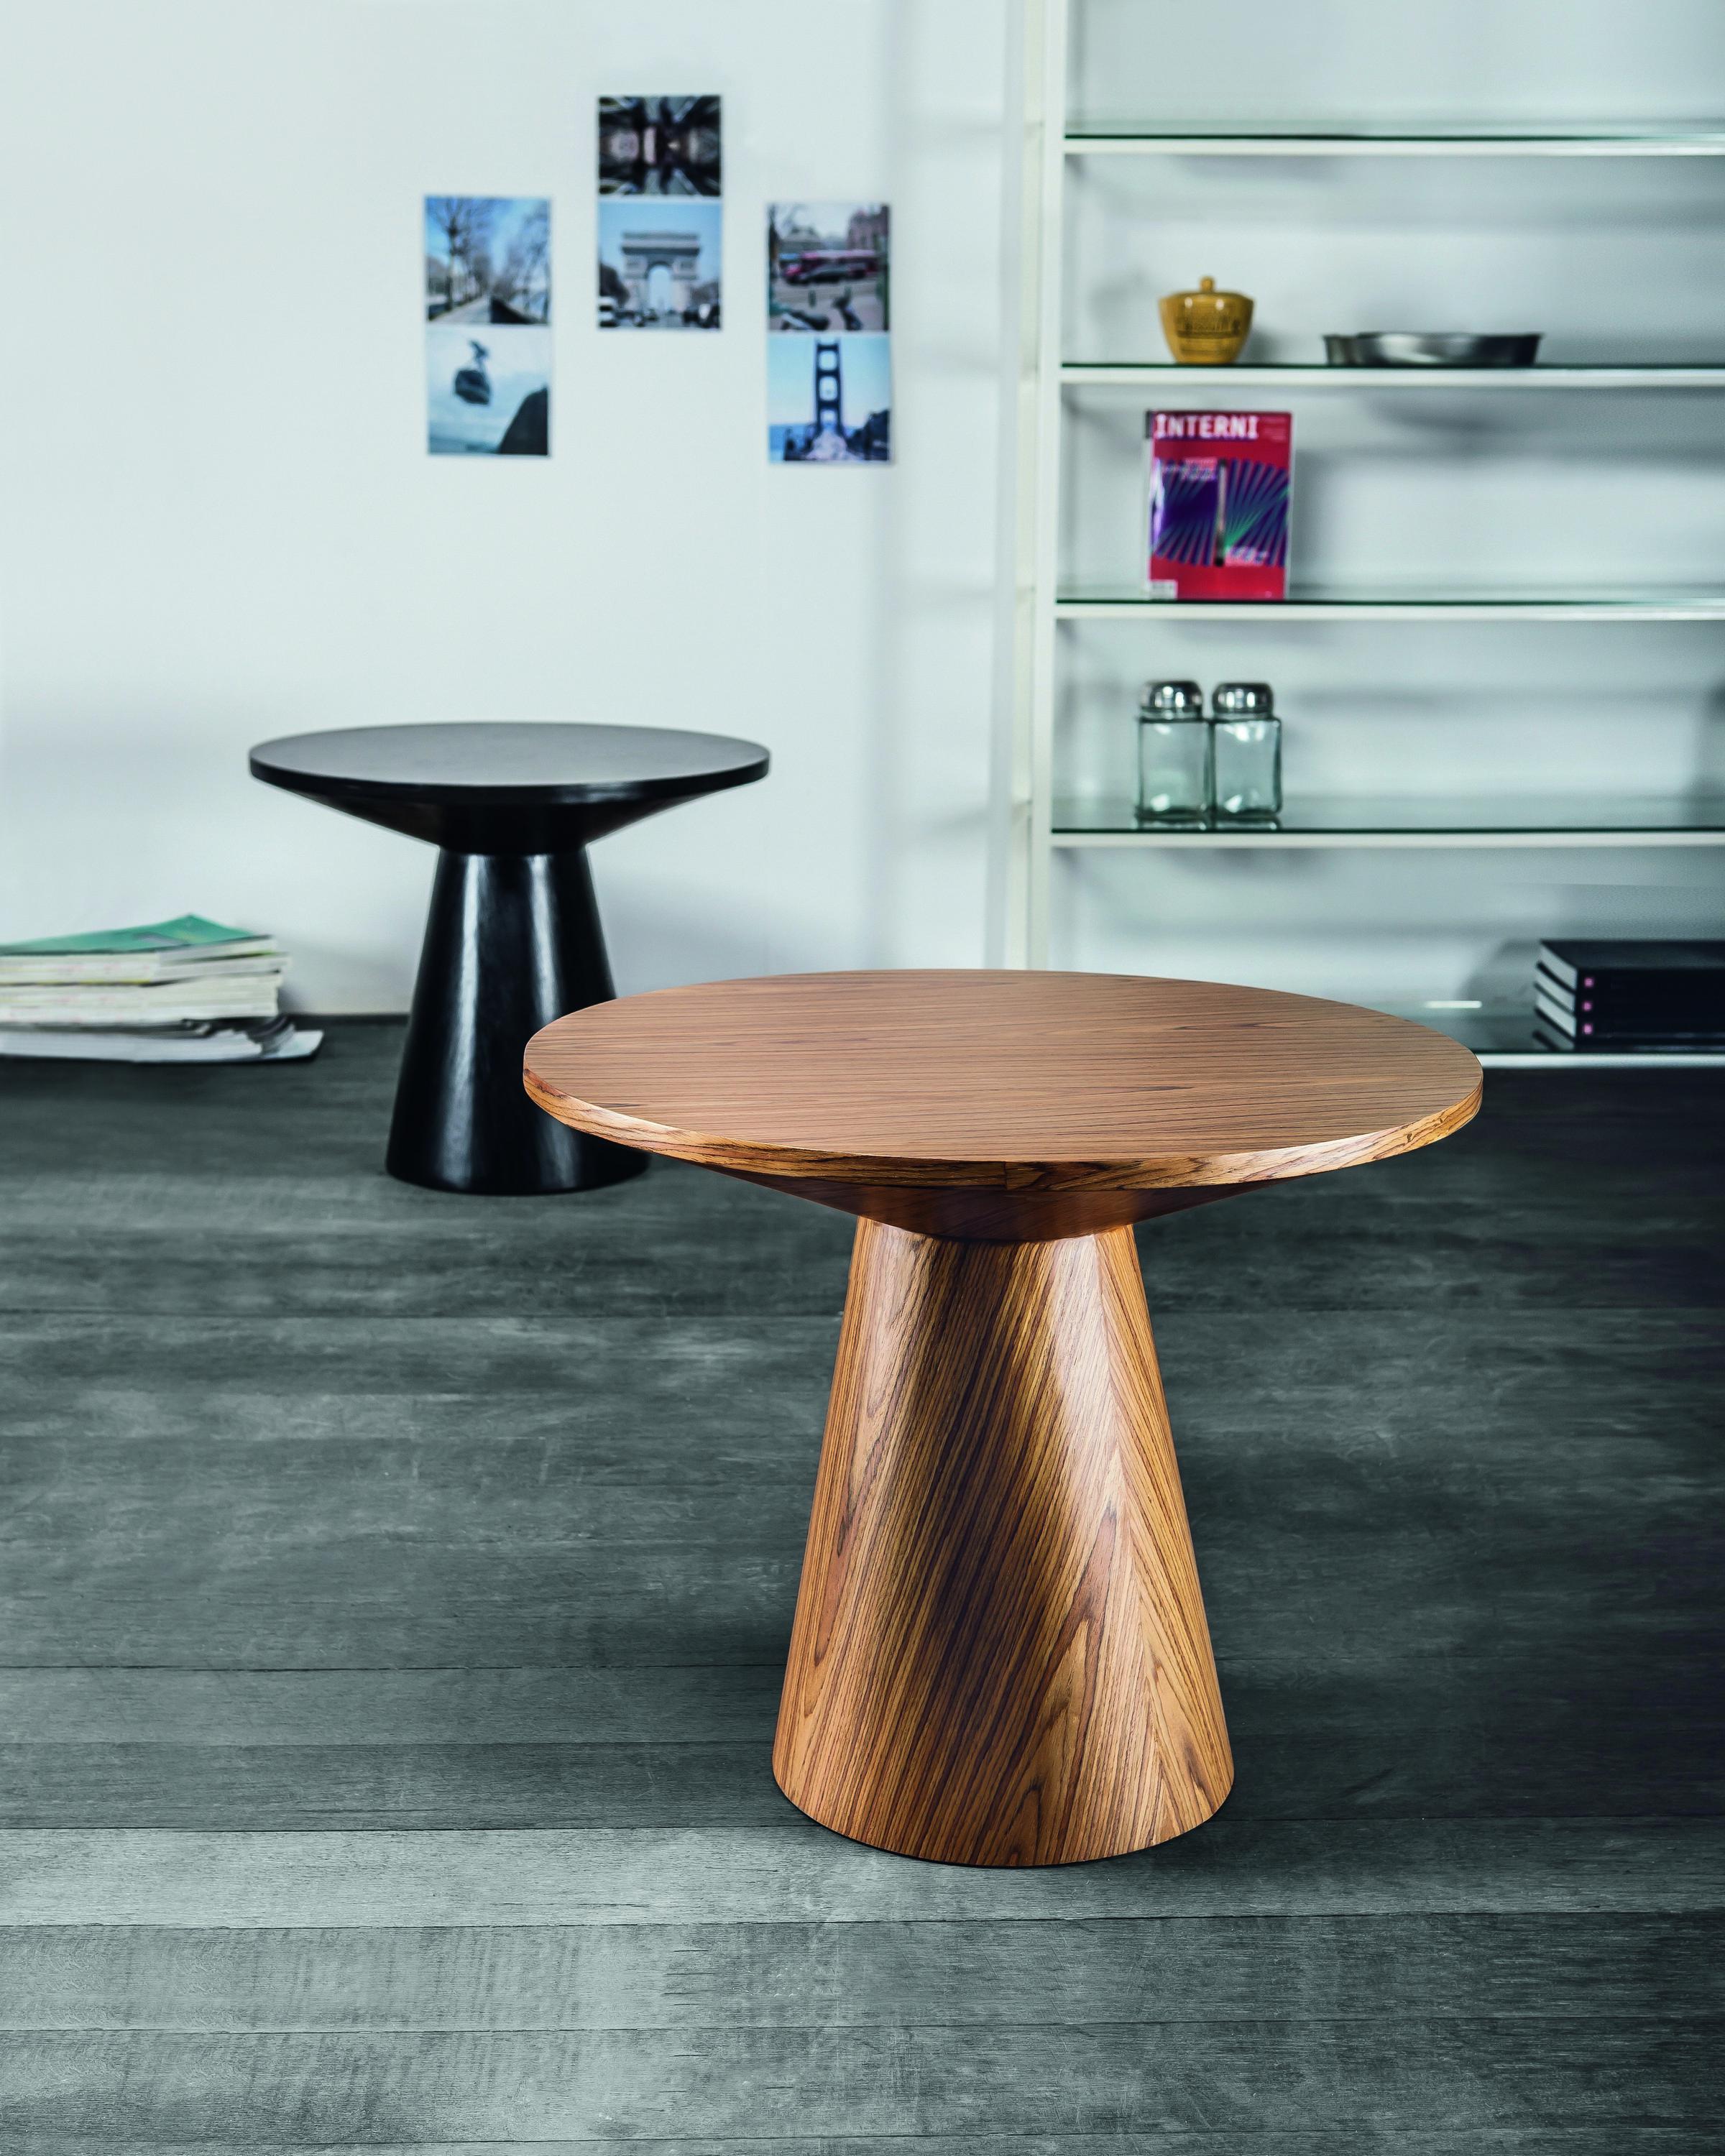 Eclipse Side Table by Doimo Brasil
Dimensions:  W 70 x D 70 x H 55 cm 
Materials: Veneer.

Also available in D 80 x H 55 cm. Please contact us. 

With the intention of providing good taste and personality, Doimo deciphers trends and follows the